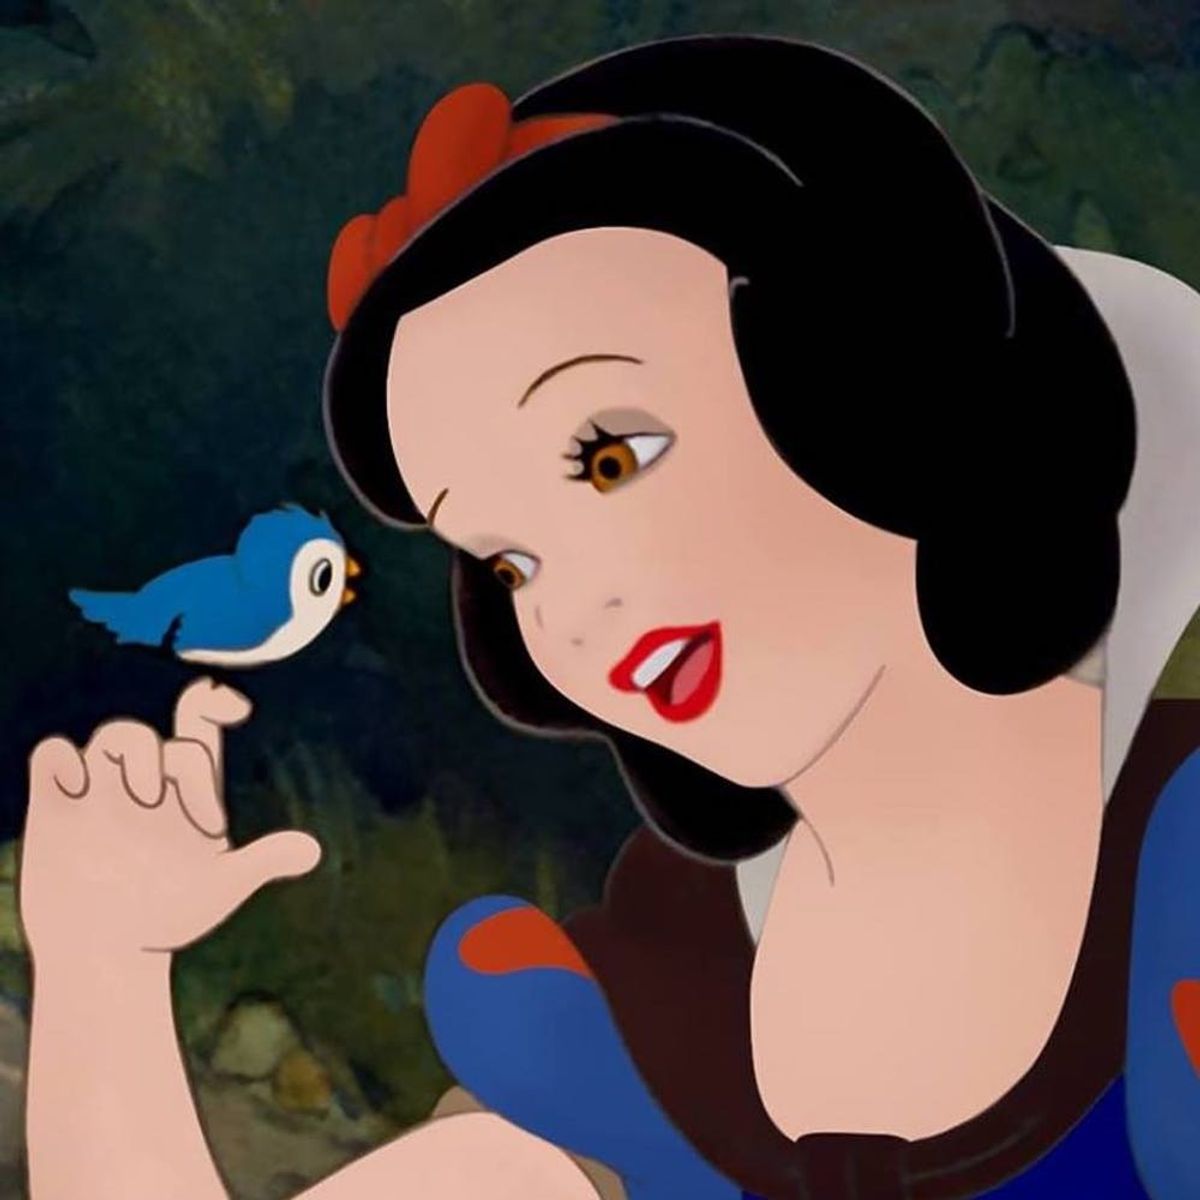 Be the Fairest of Them All With This New Line of “Snow White” Cosmetics